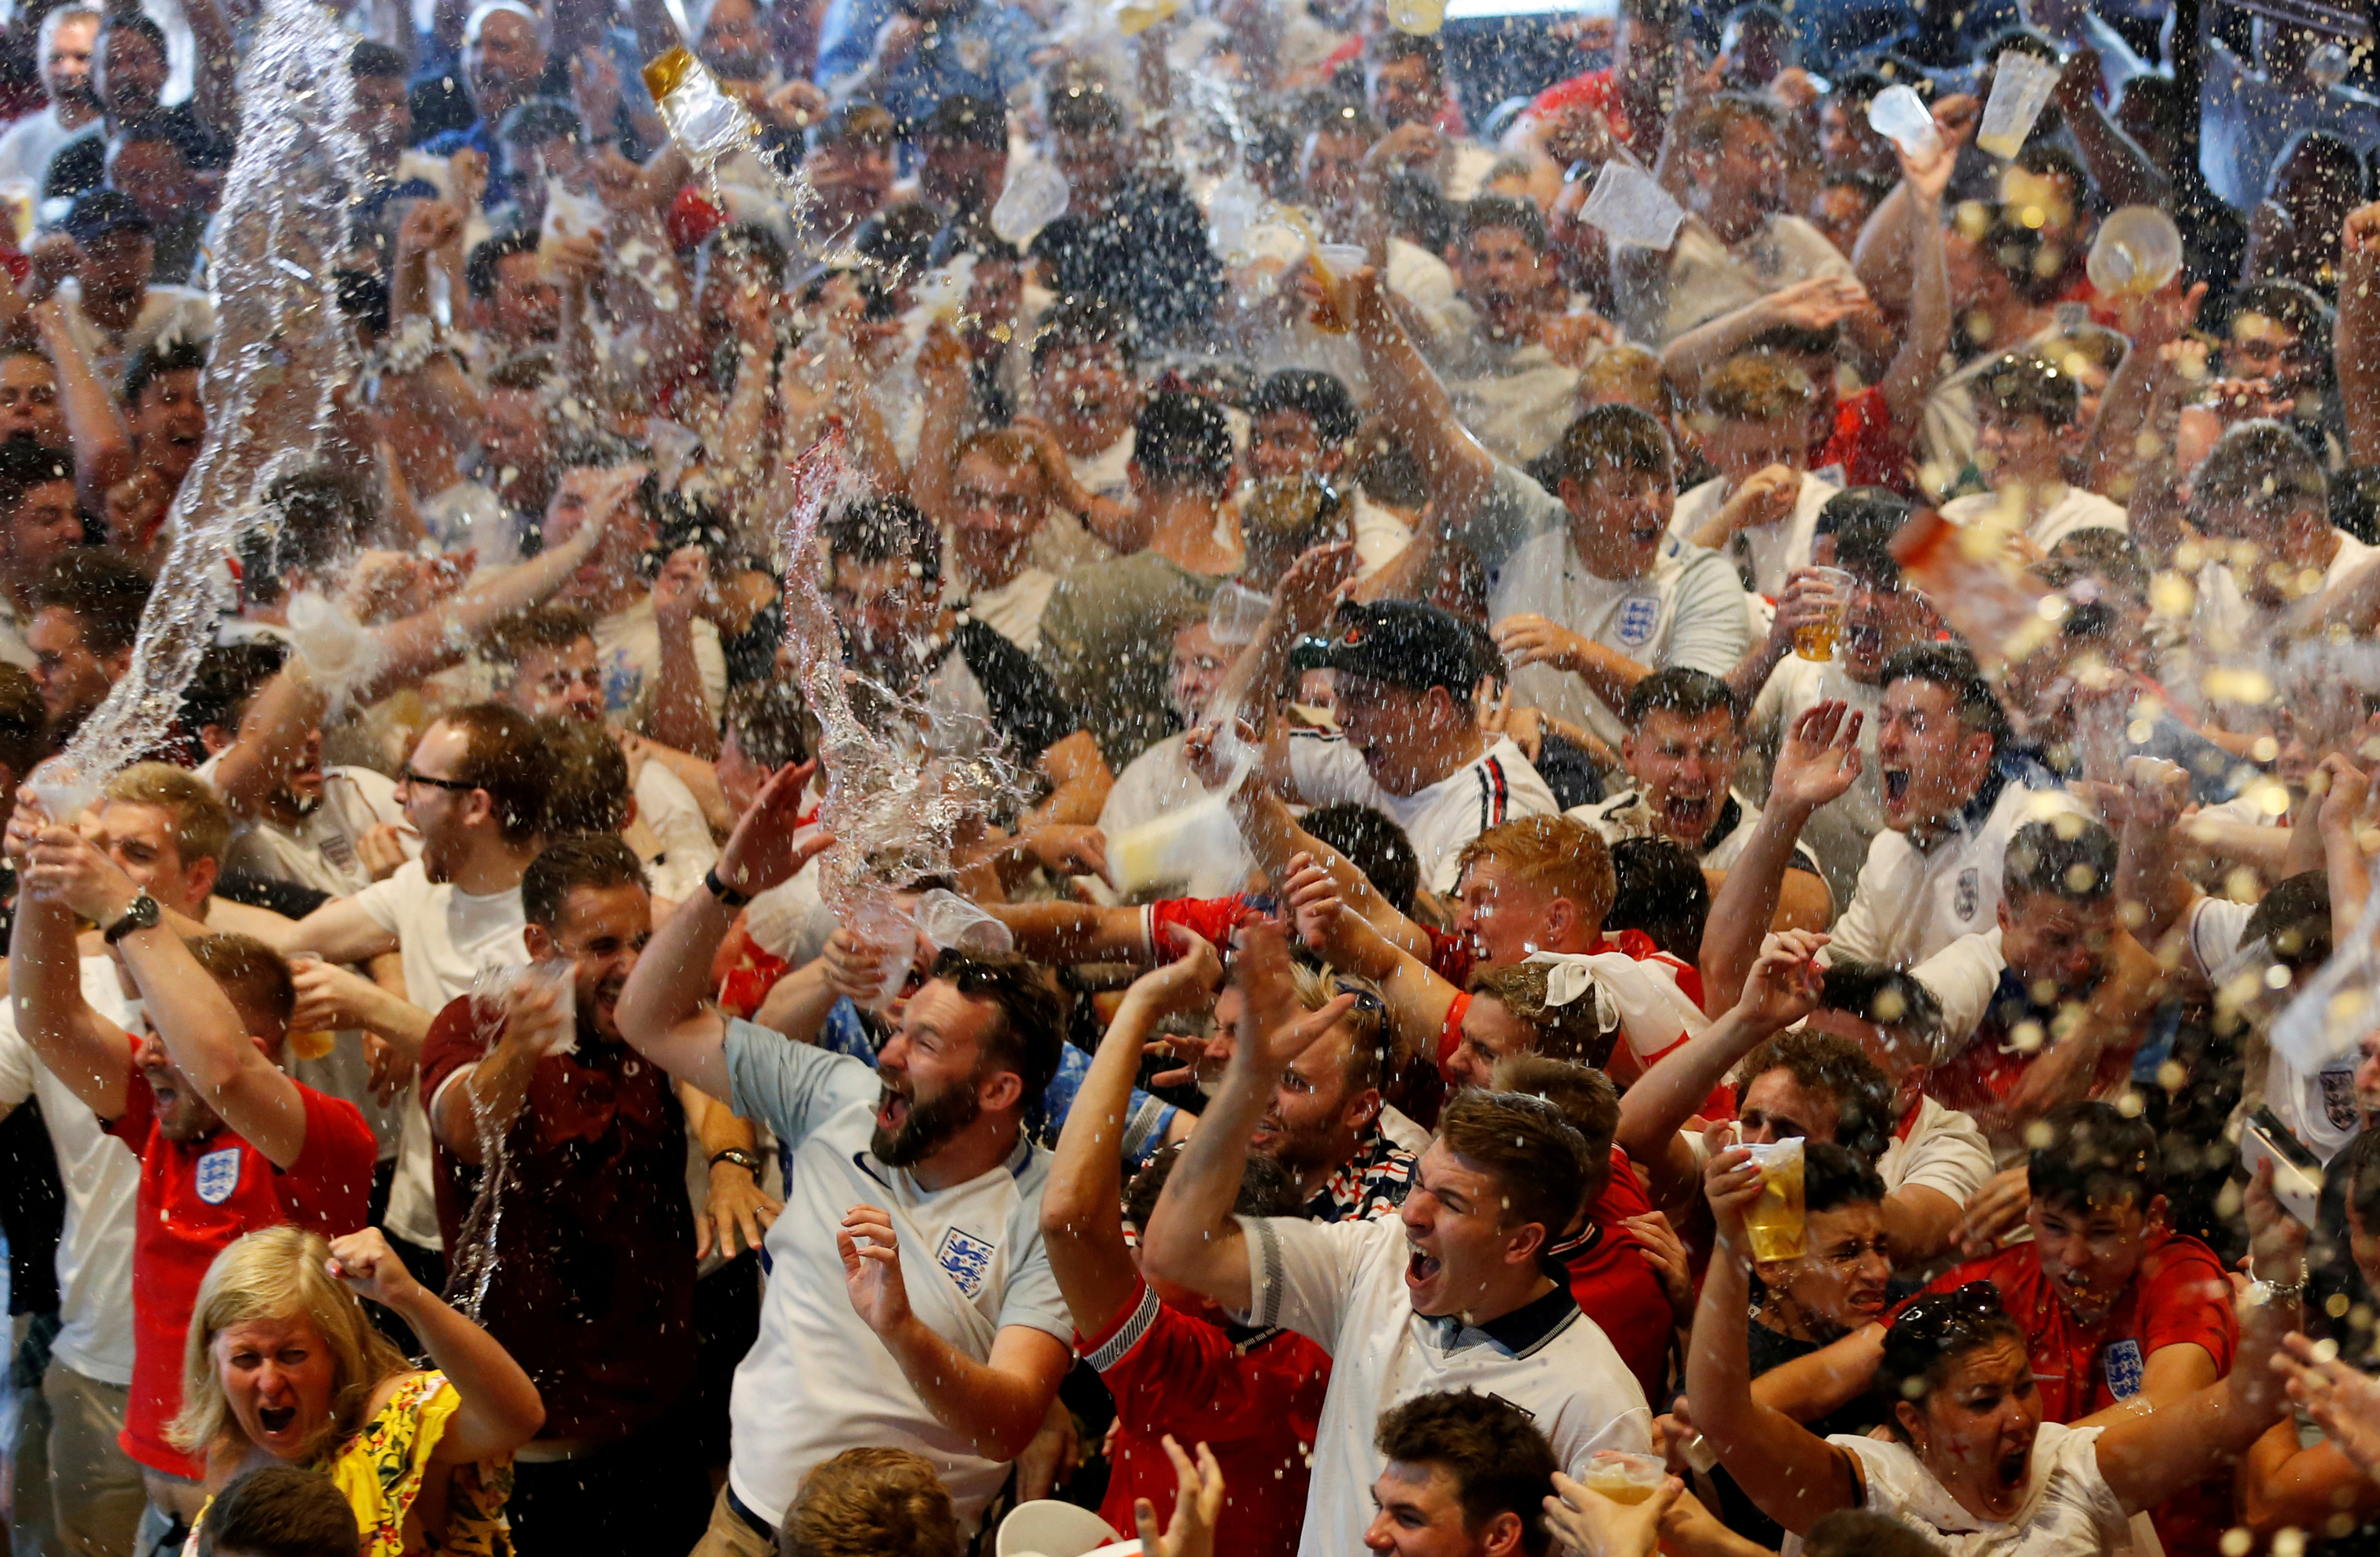 England fans celebrate during the Sweden vs. England game from Bristol, Britain on July 7, 2018. (Ed Sykes—Reuters)